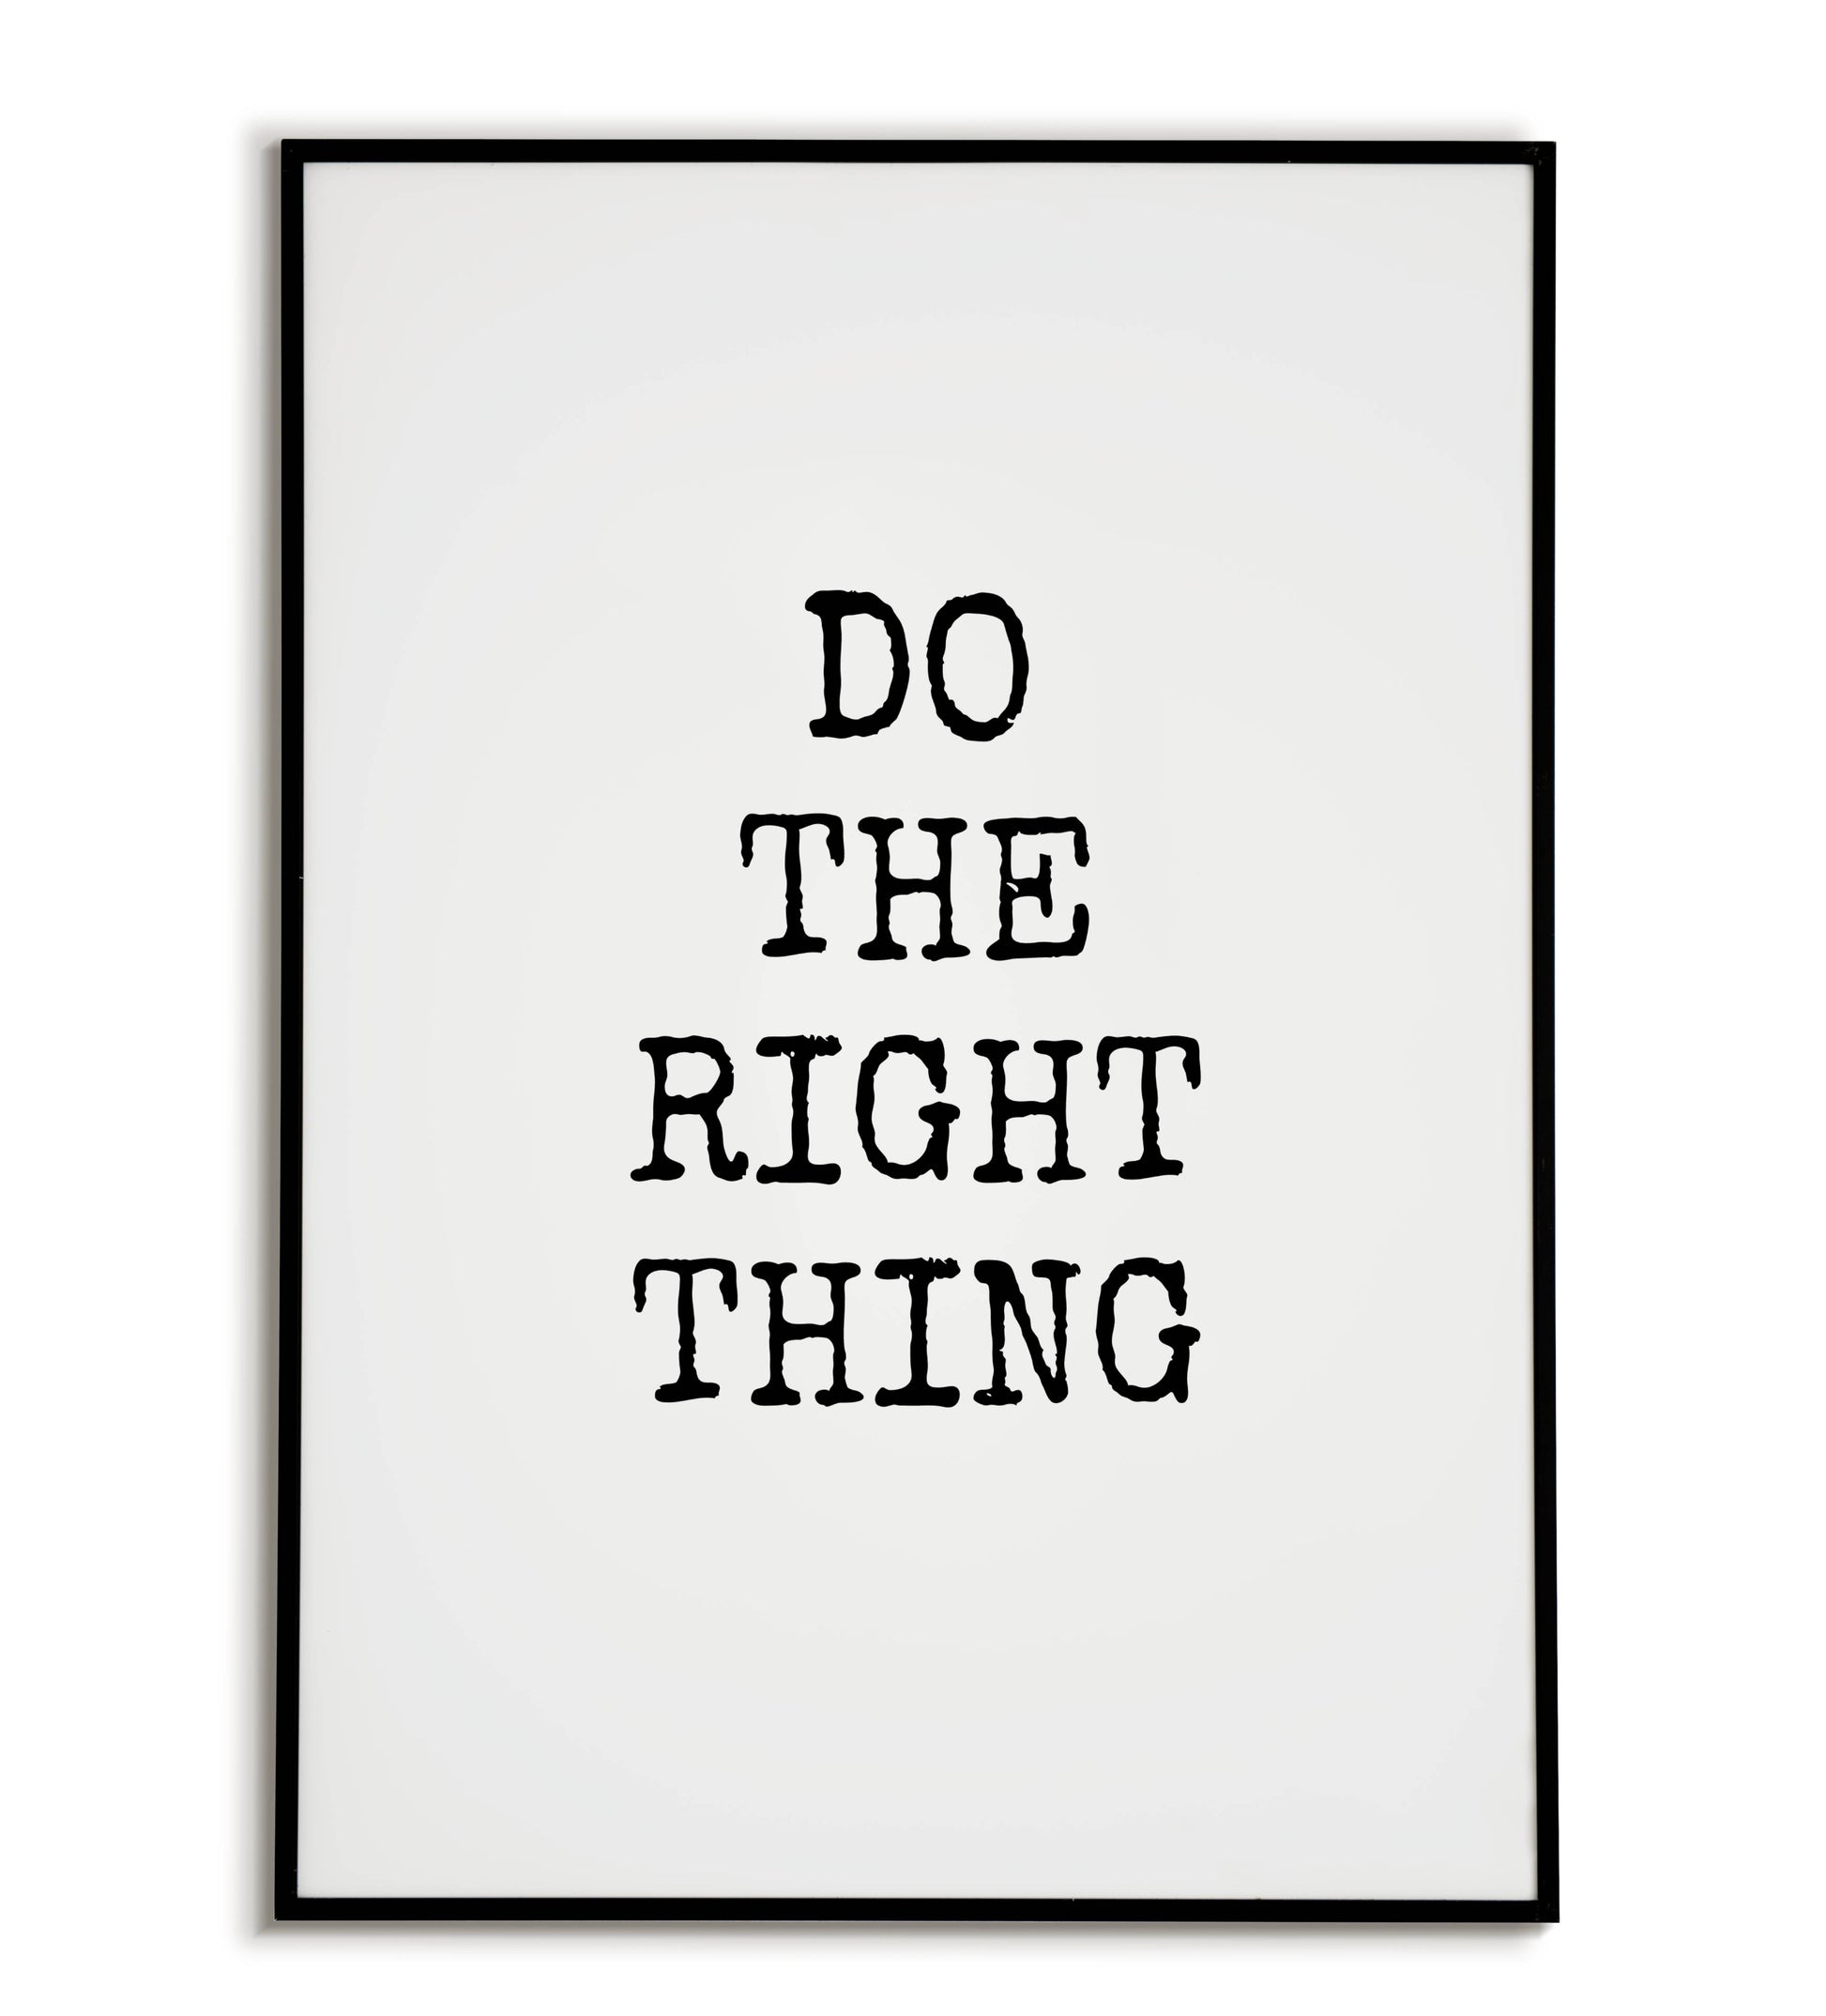 "Do the right thing" printable motivational poster.